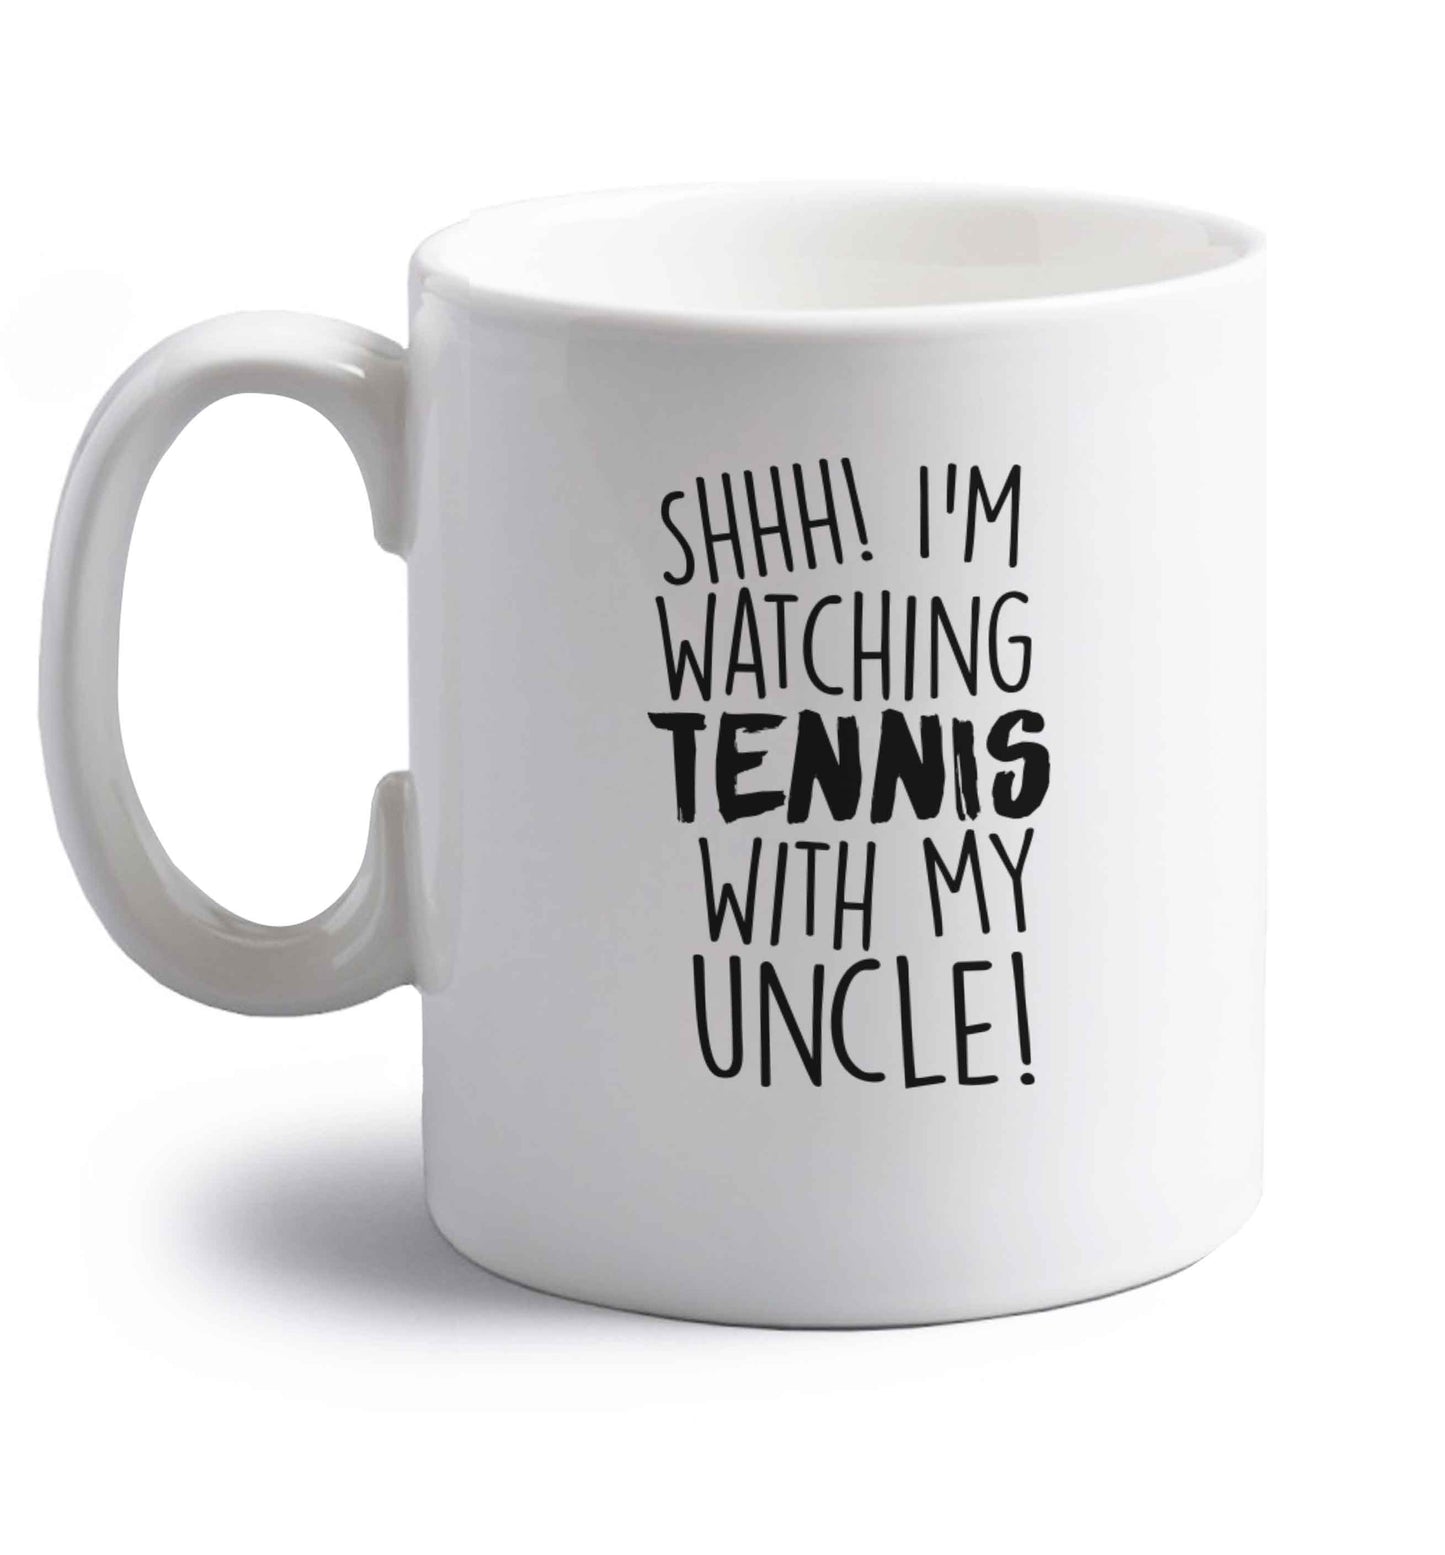 Shh! I'm watching tennis with my uncle! right handed white ceramic mug 